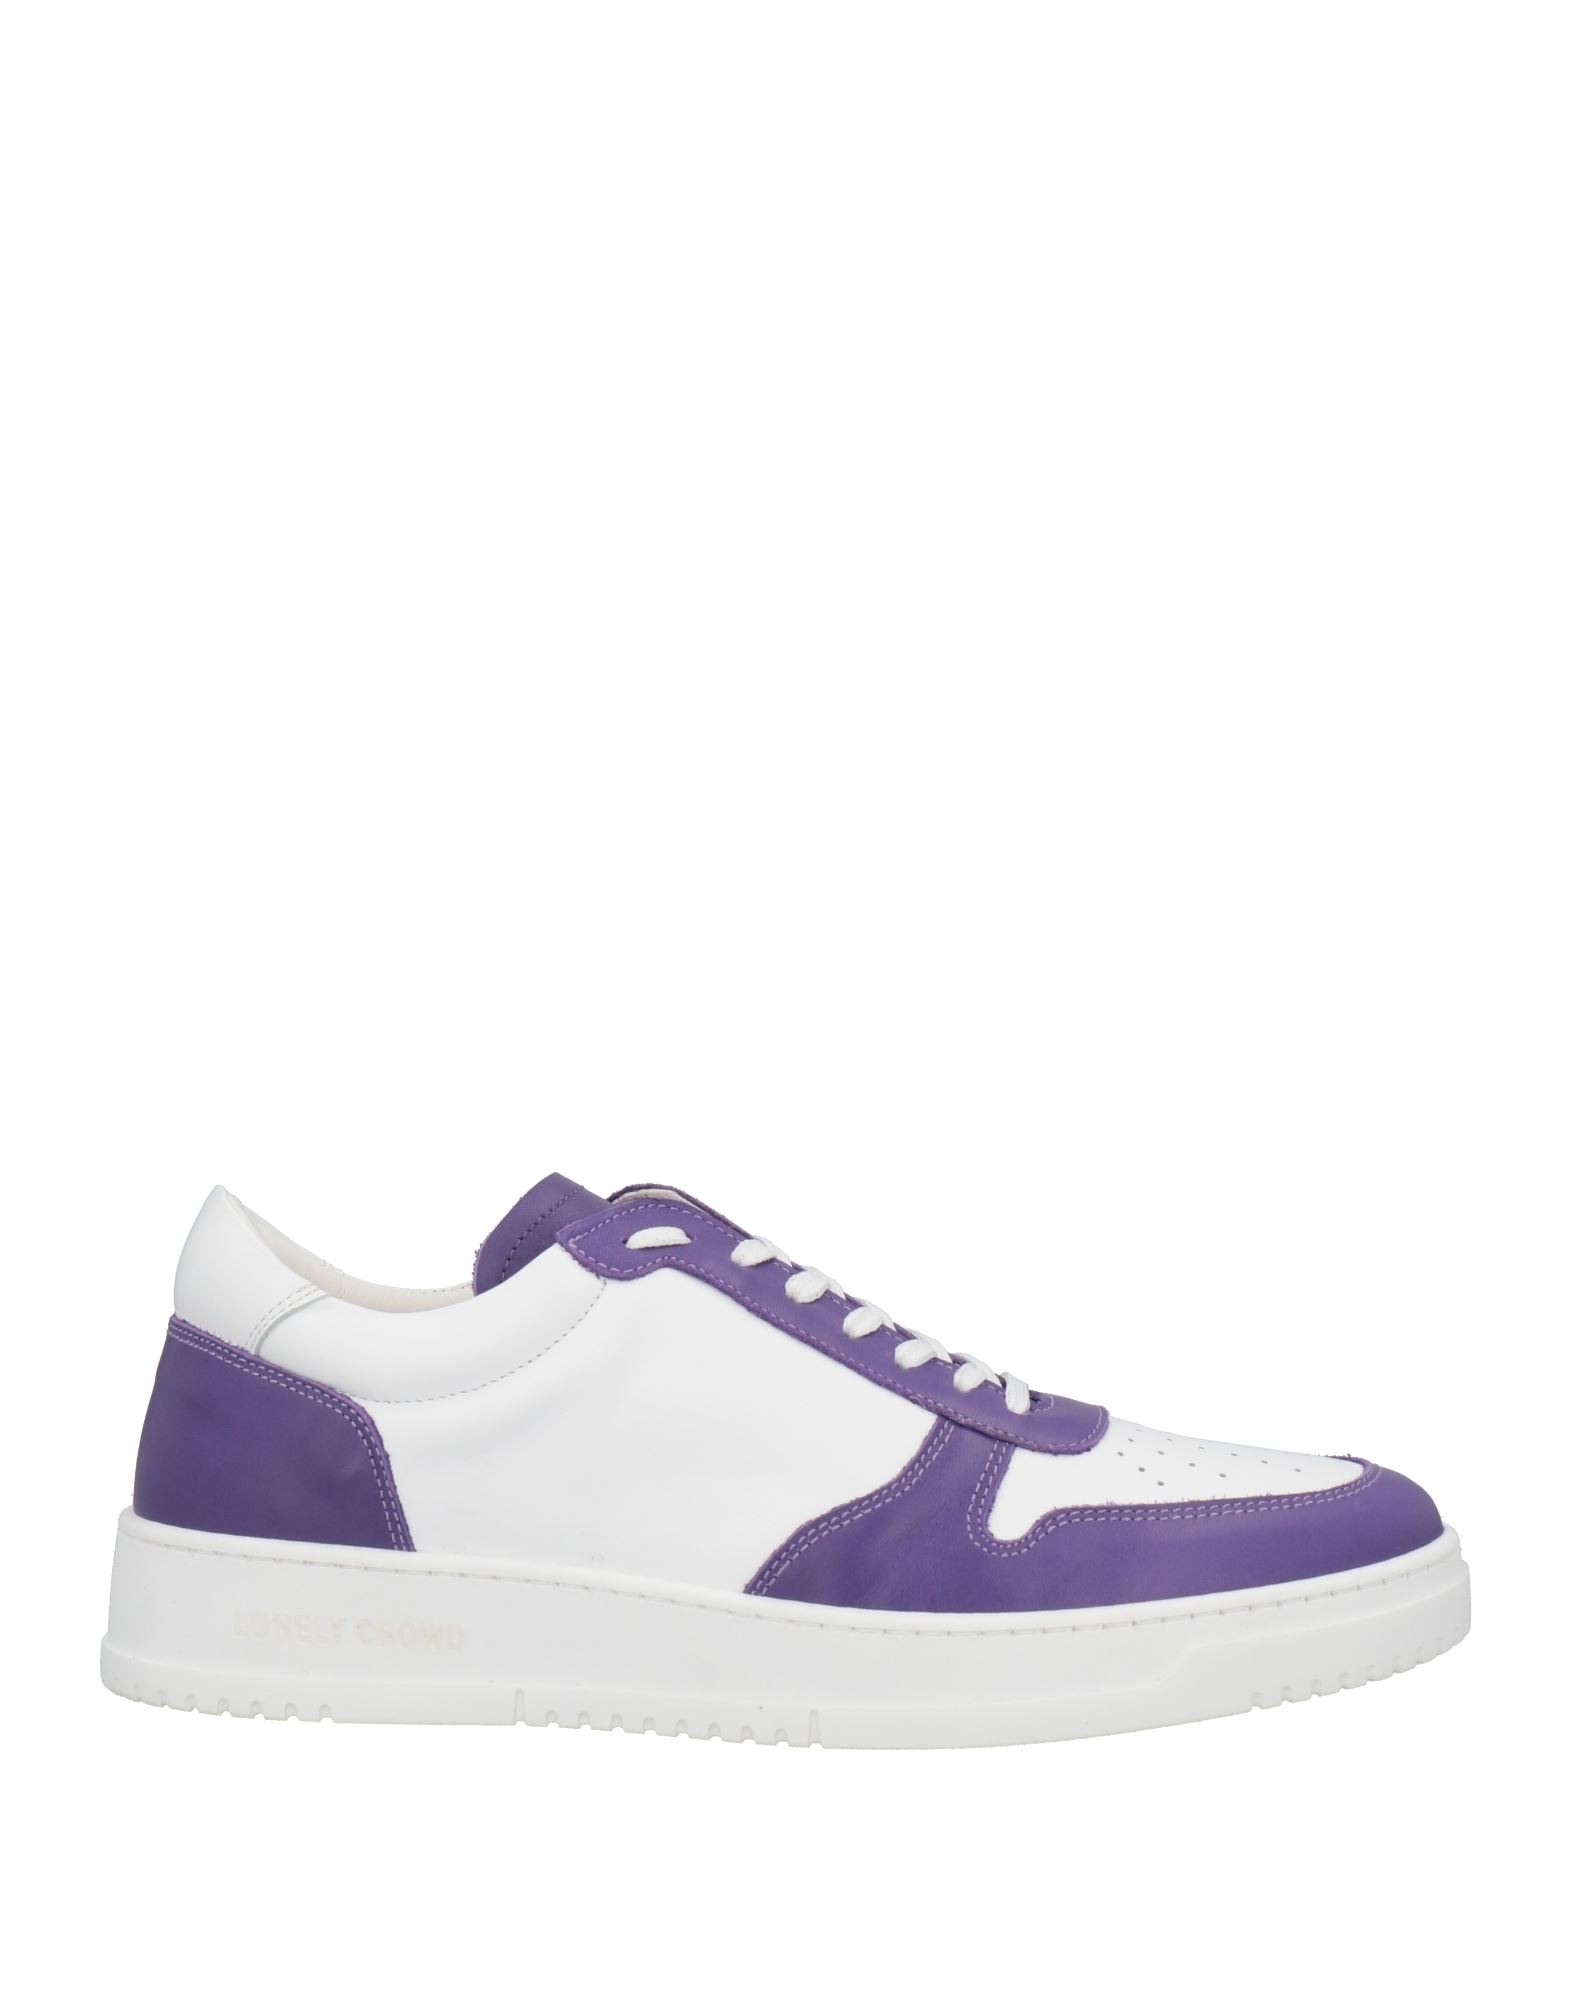 Shop Lonely Crowd Man Sneakers Purple Size 8 Soft Leather